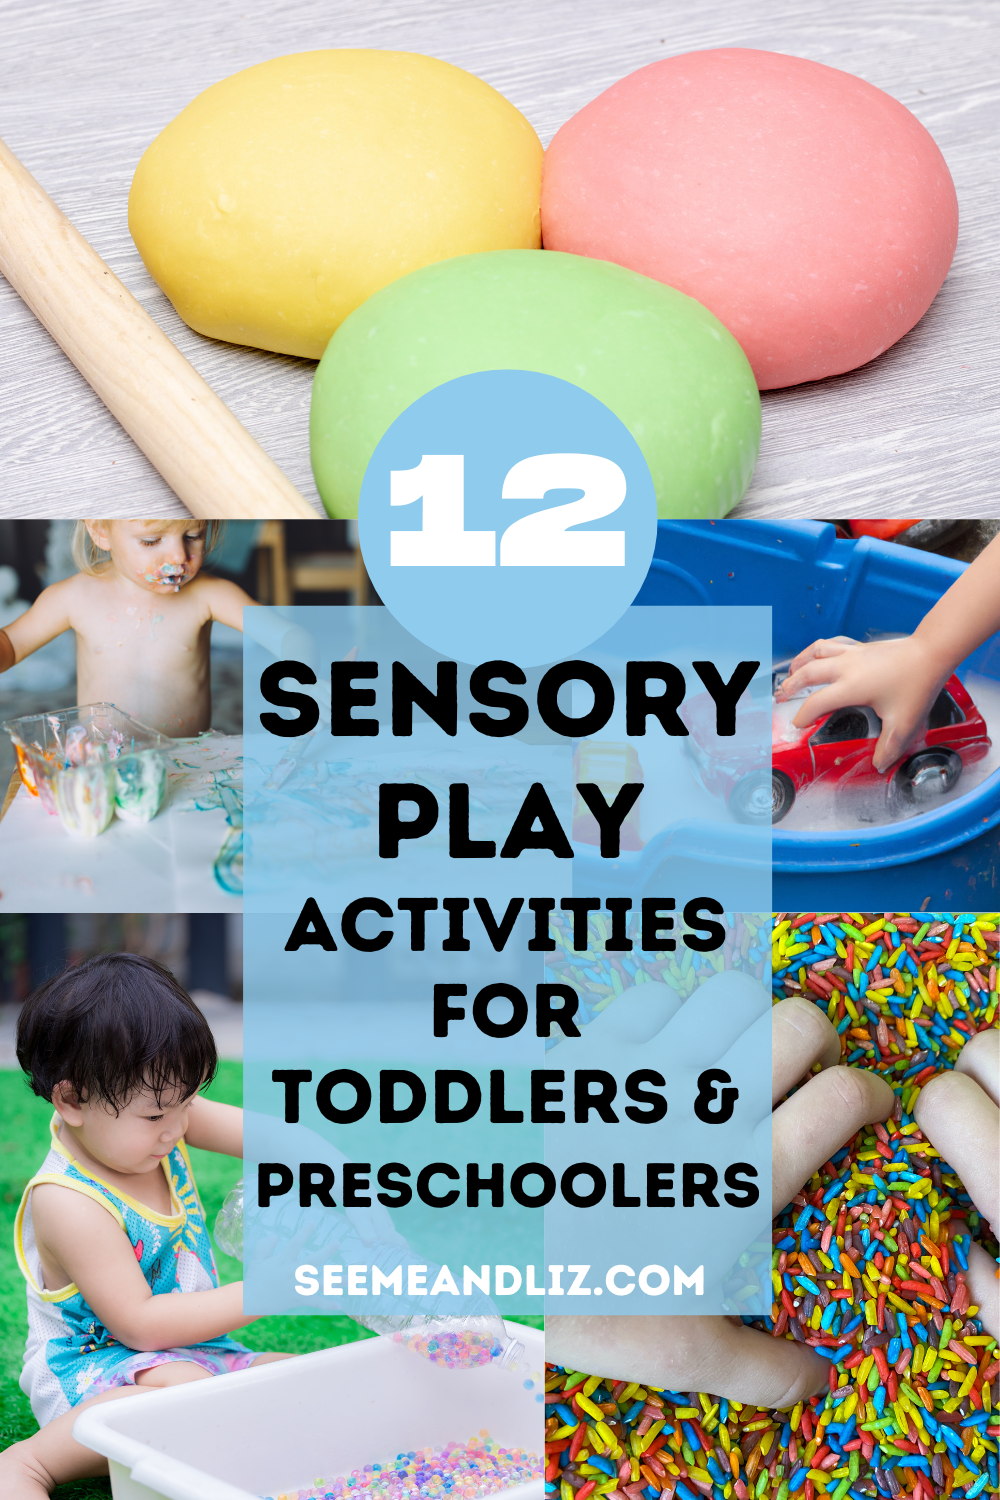 Sensory Play Activities for Toddlers and Preschoolers